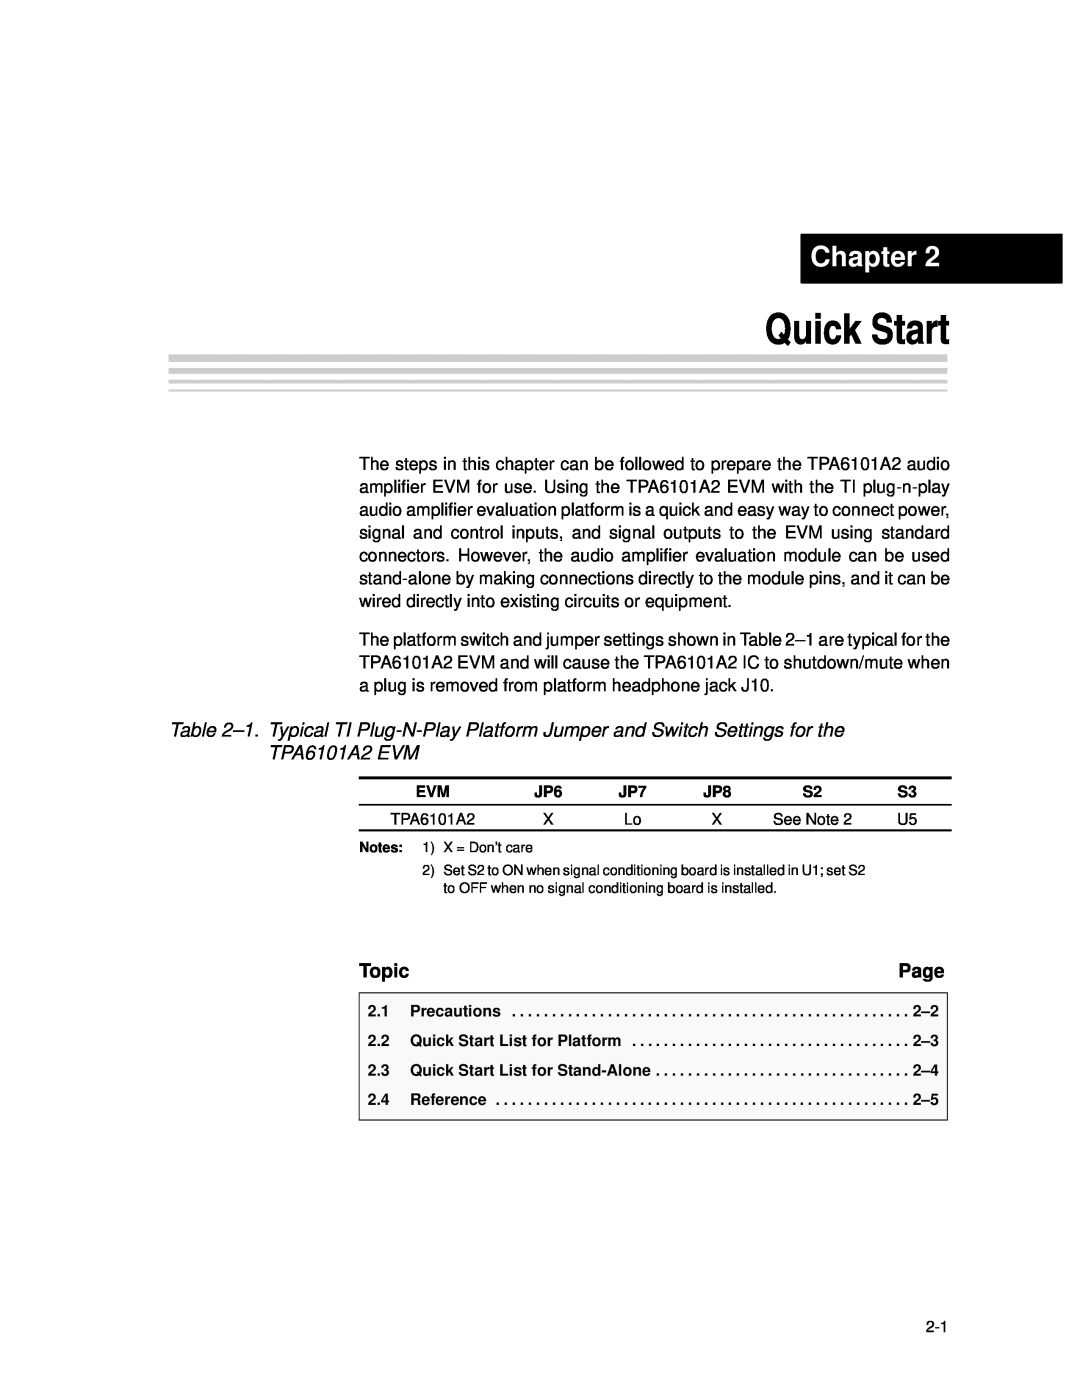 Texas Instruments TPA6101A2 manual Quick Start, Chapter, Page, Topic 